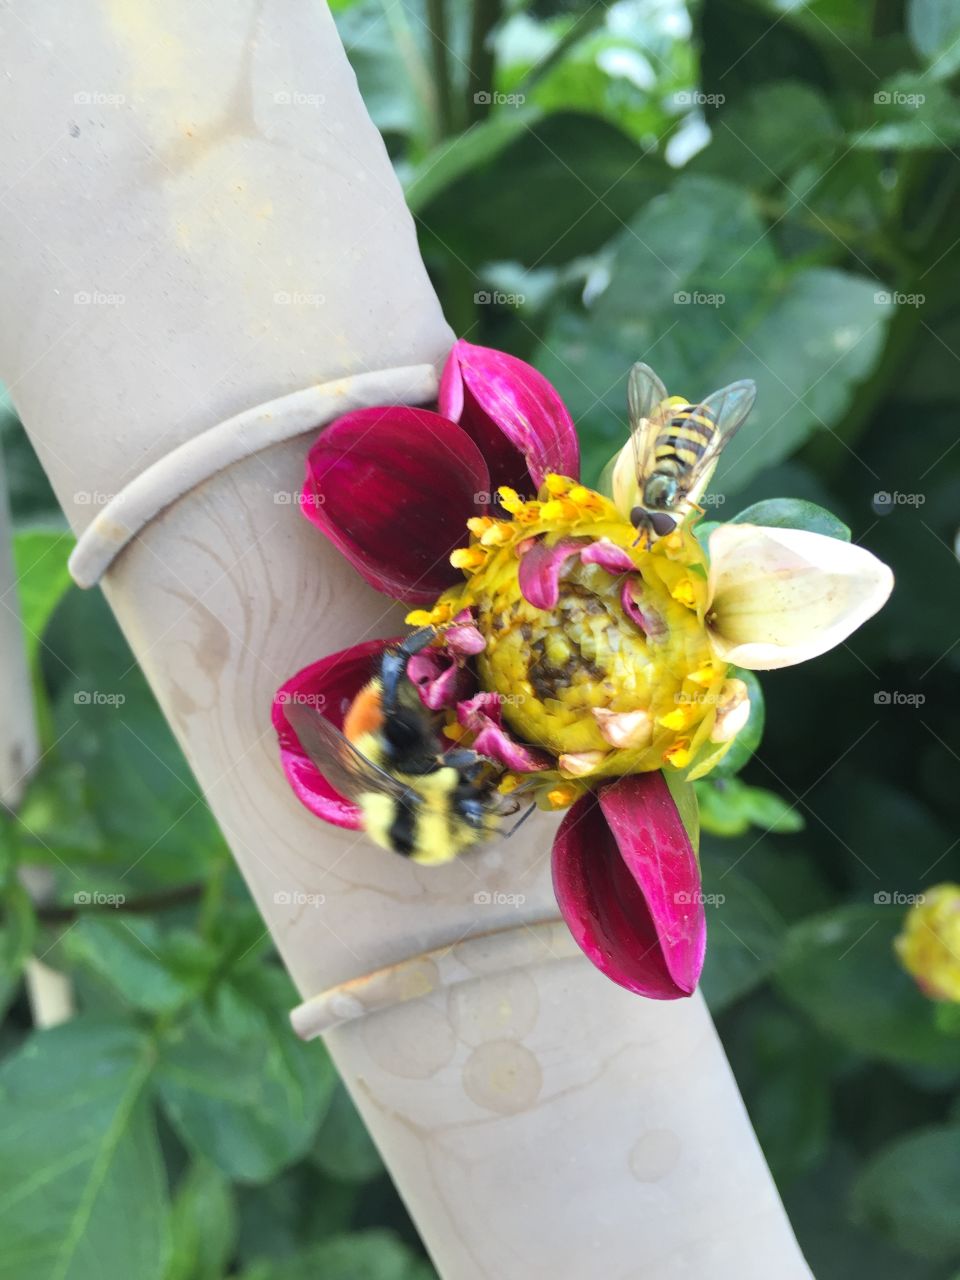 Garden decoration with single flower centred with honey bee and wasp. 